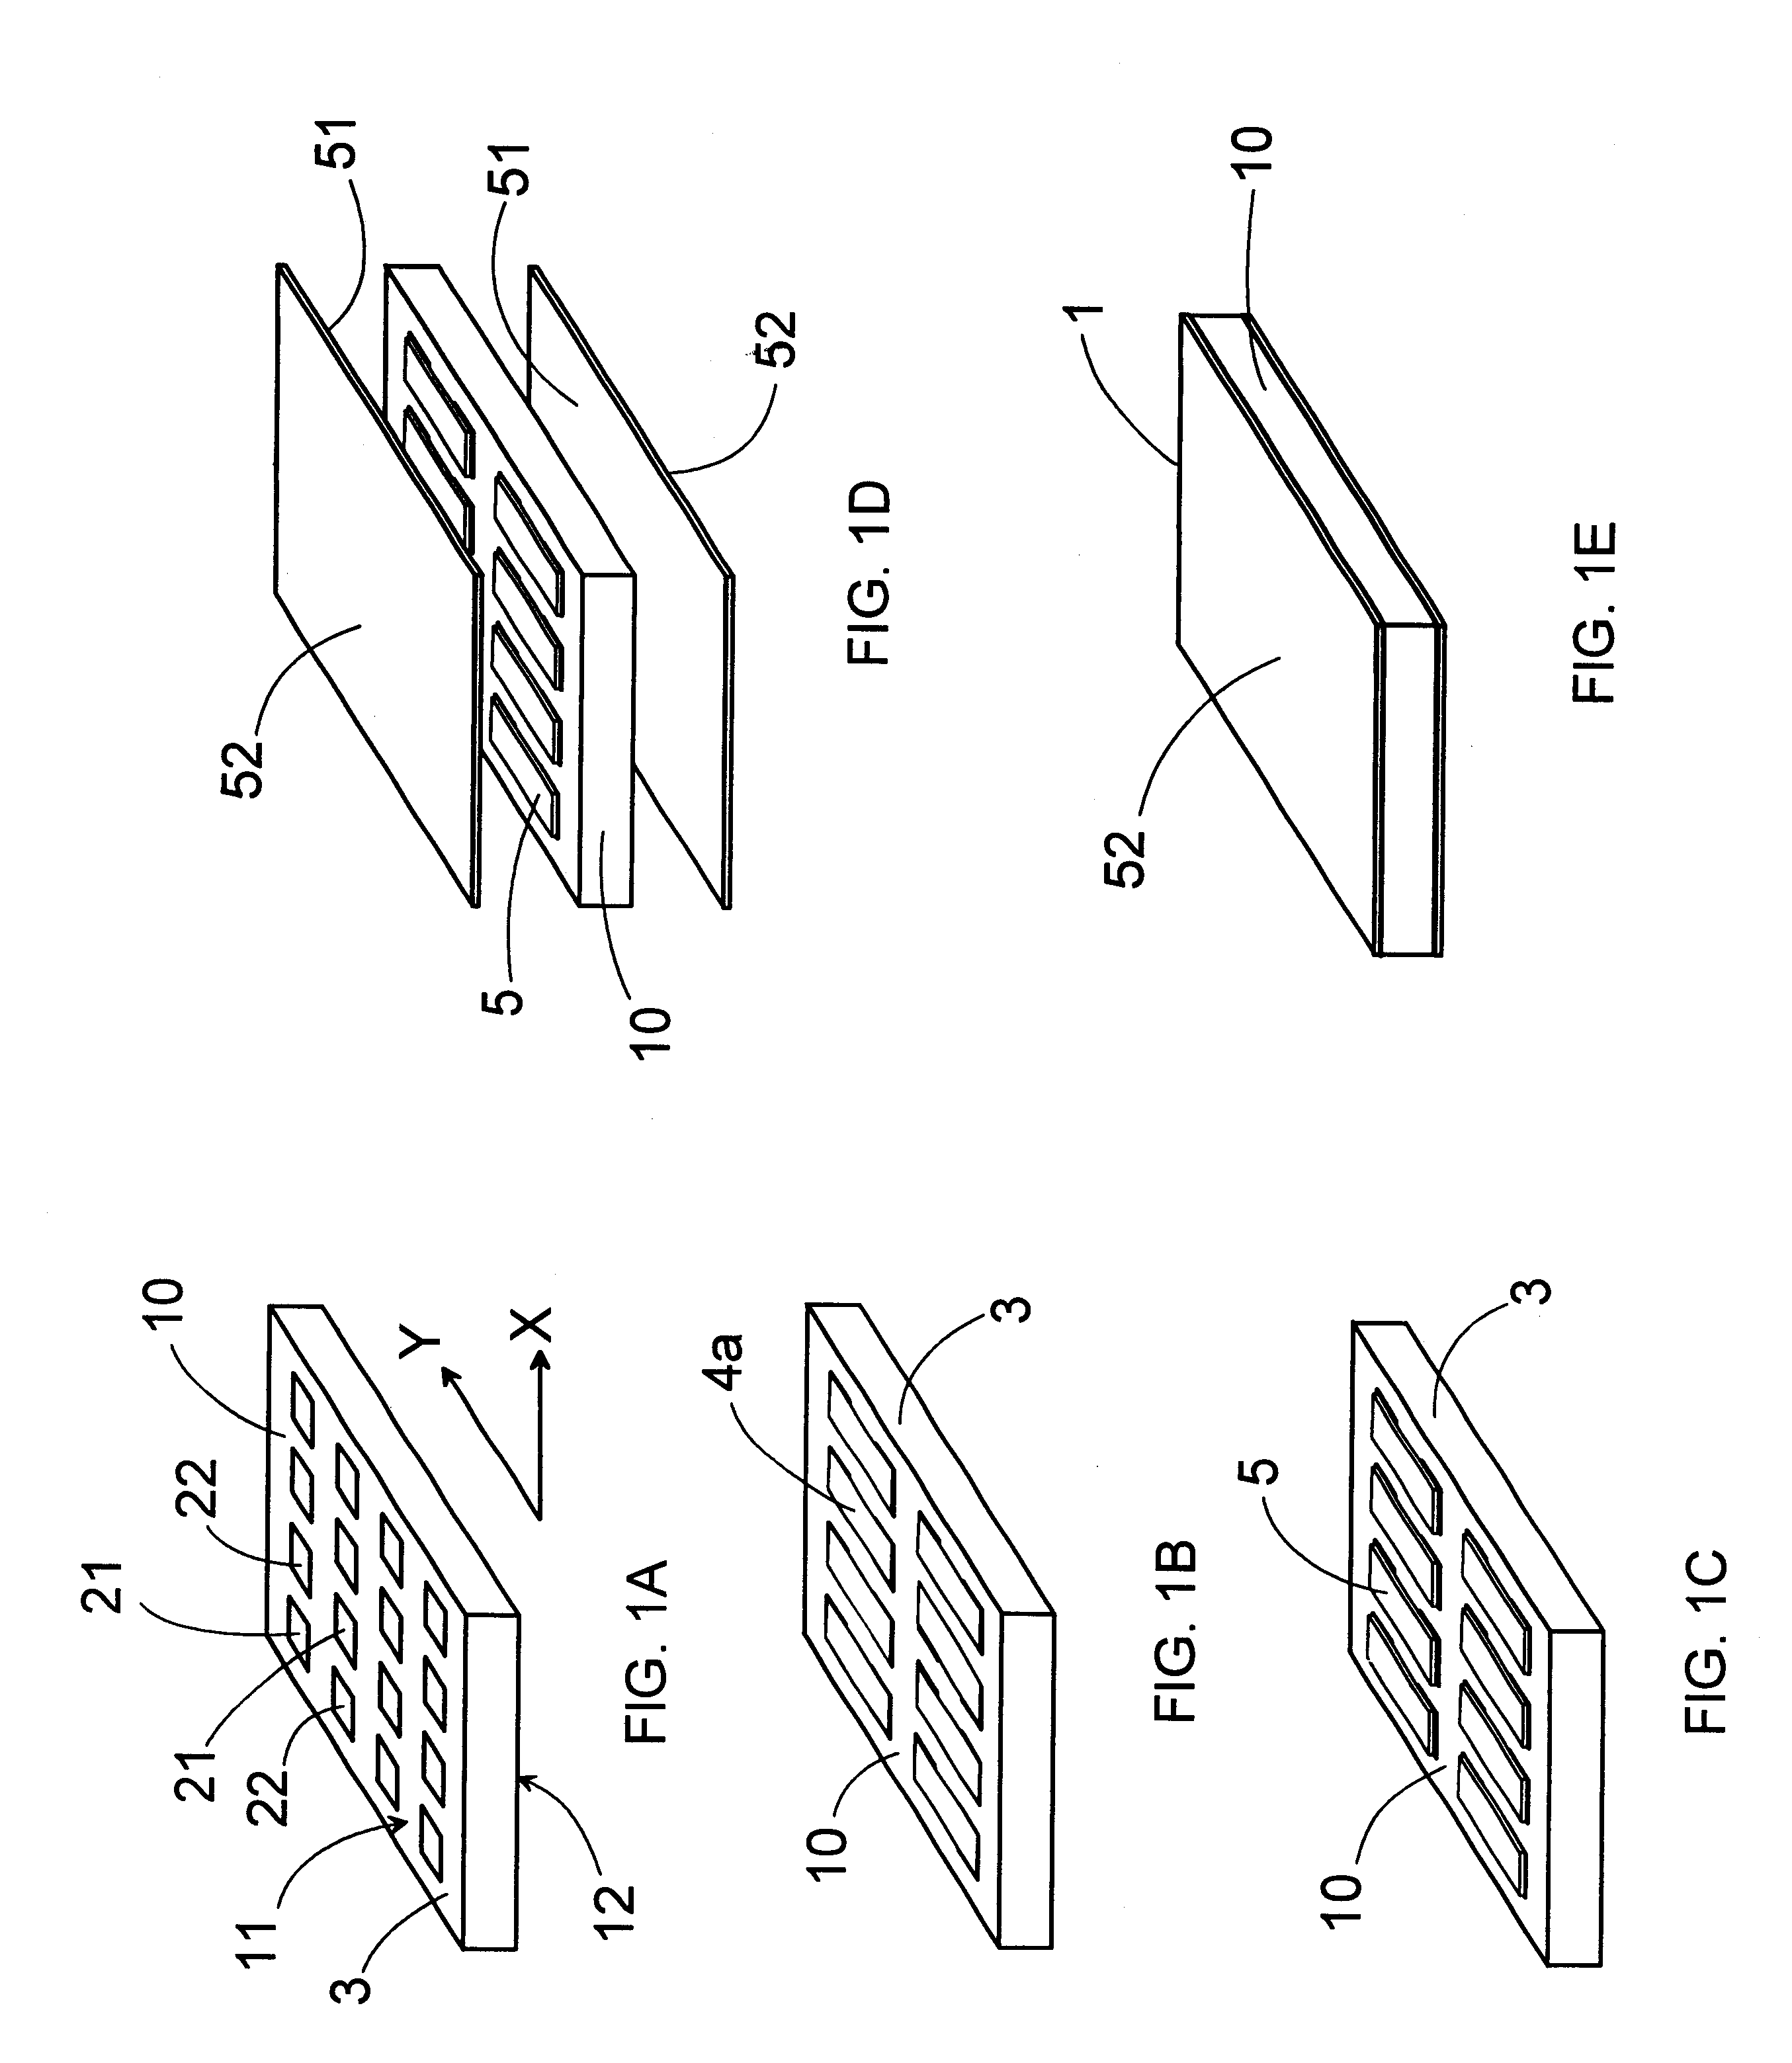 Thermoelectric module with improved heat-transfer efficiency and method of manufacturing the same